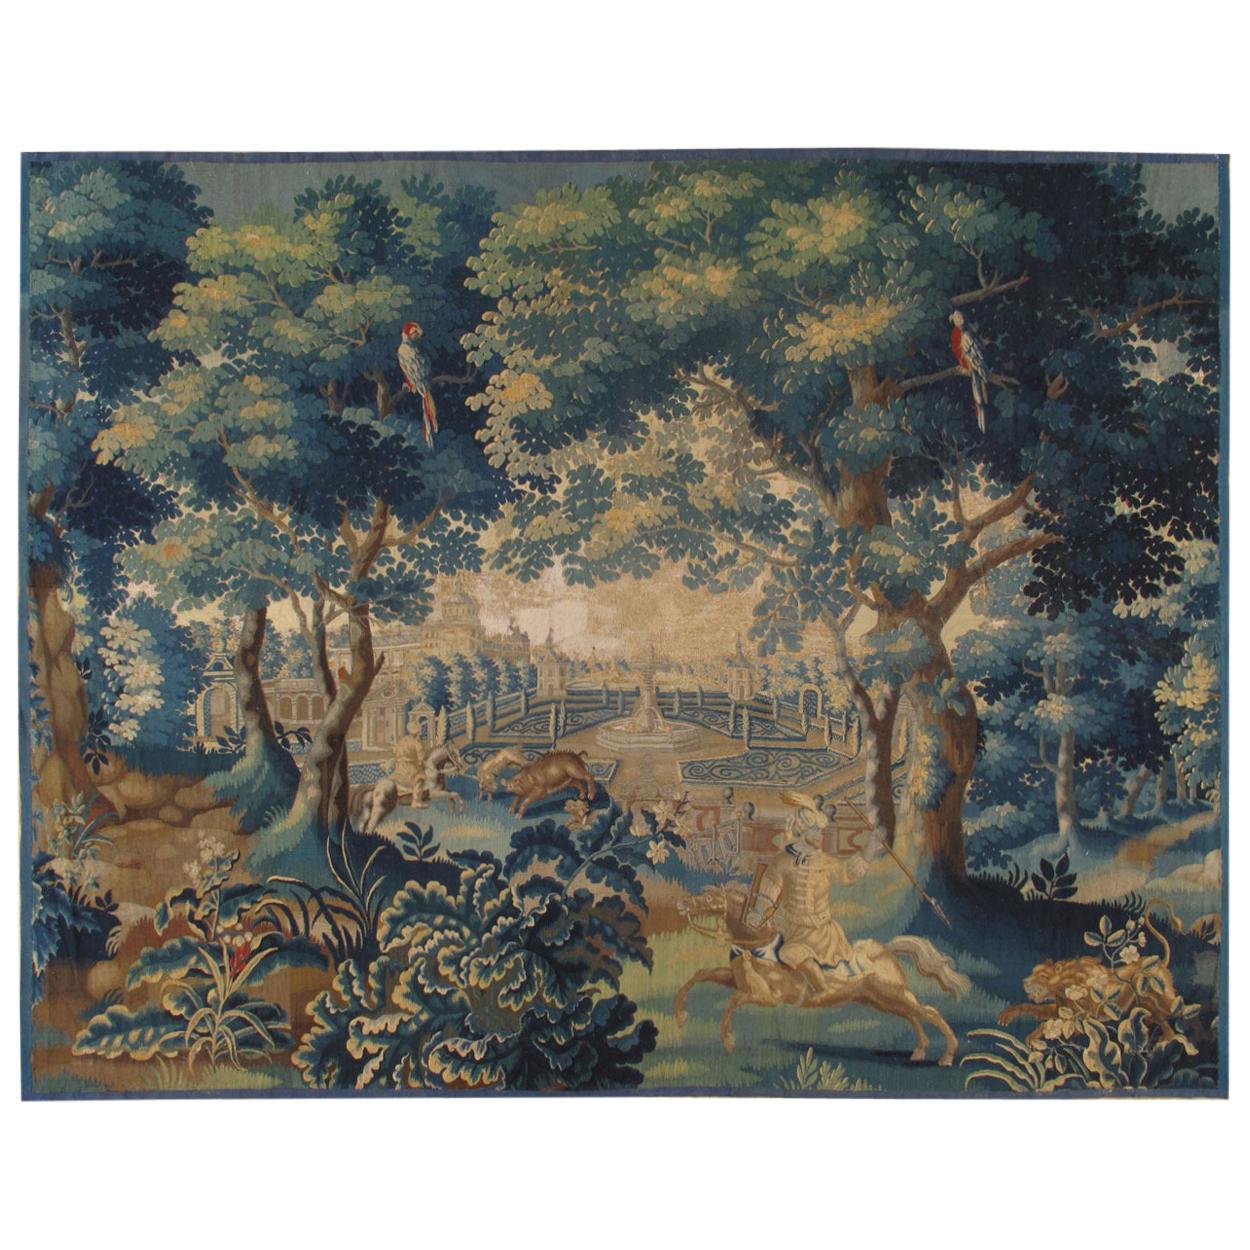 18th Century Fine Brussels Tapestry, Silk Wool, Green, Blue, Mythological Theme